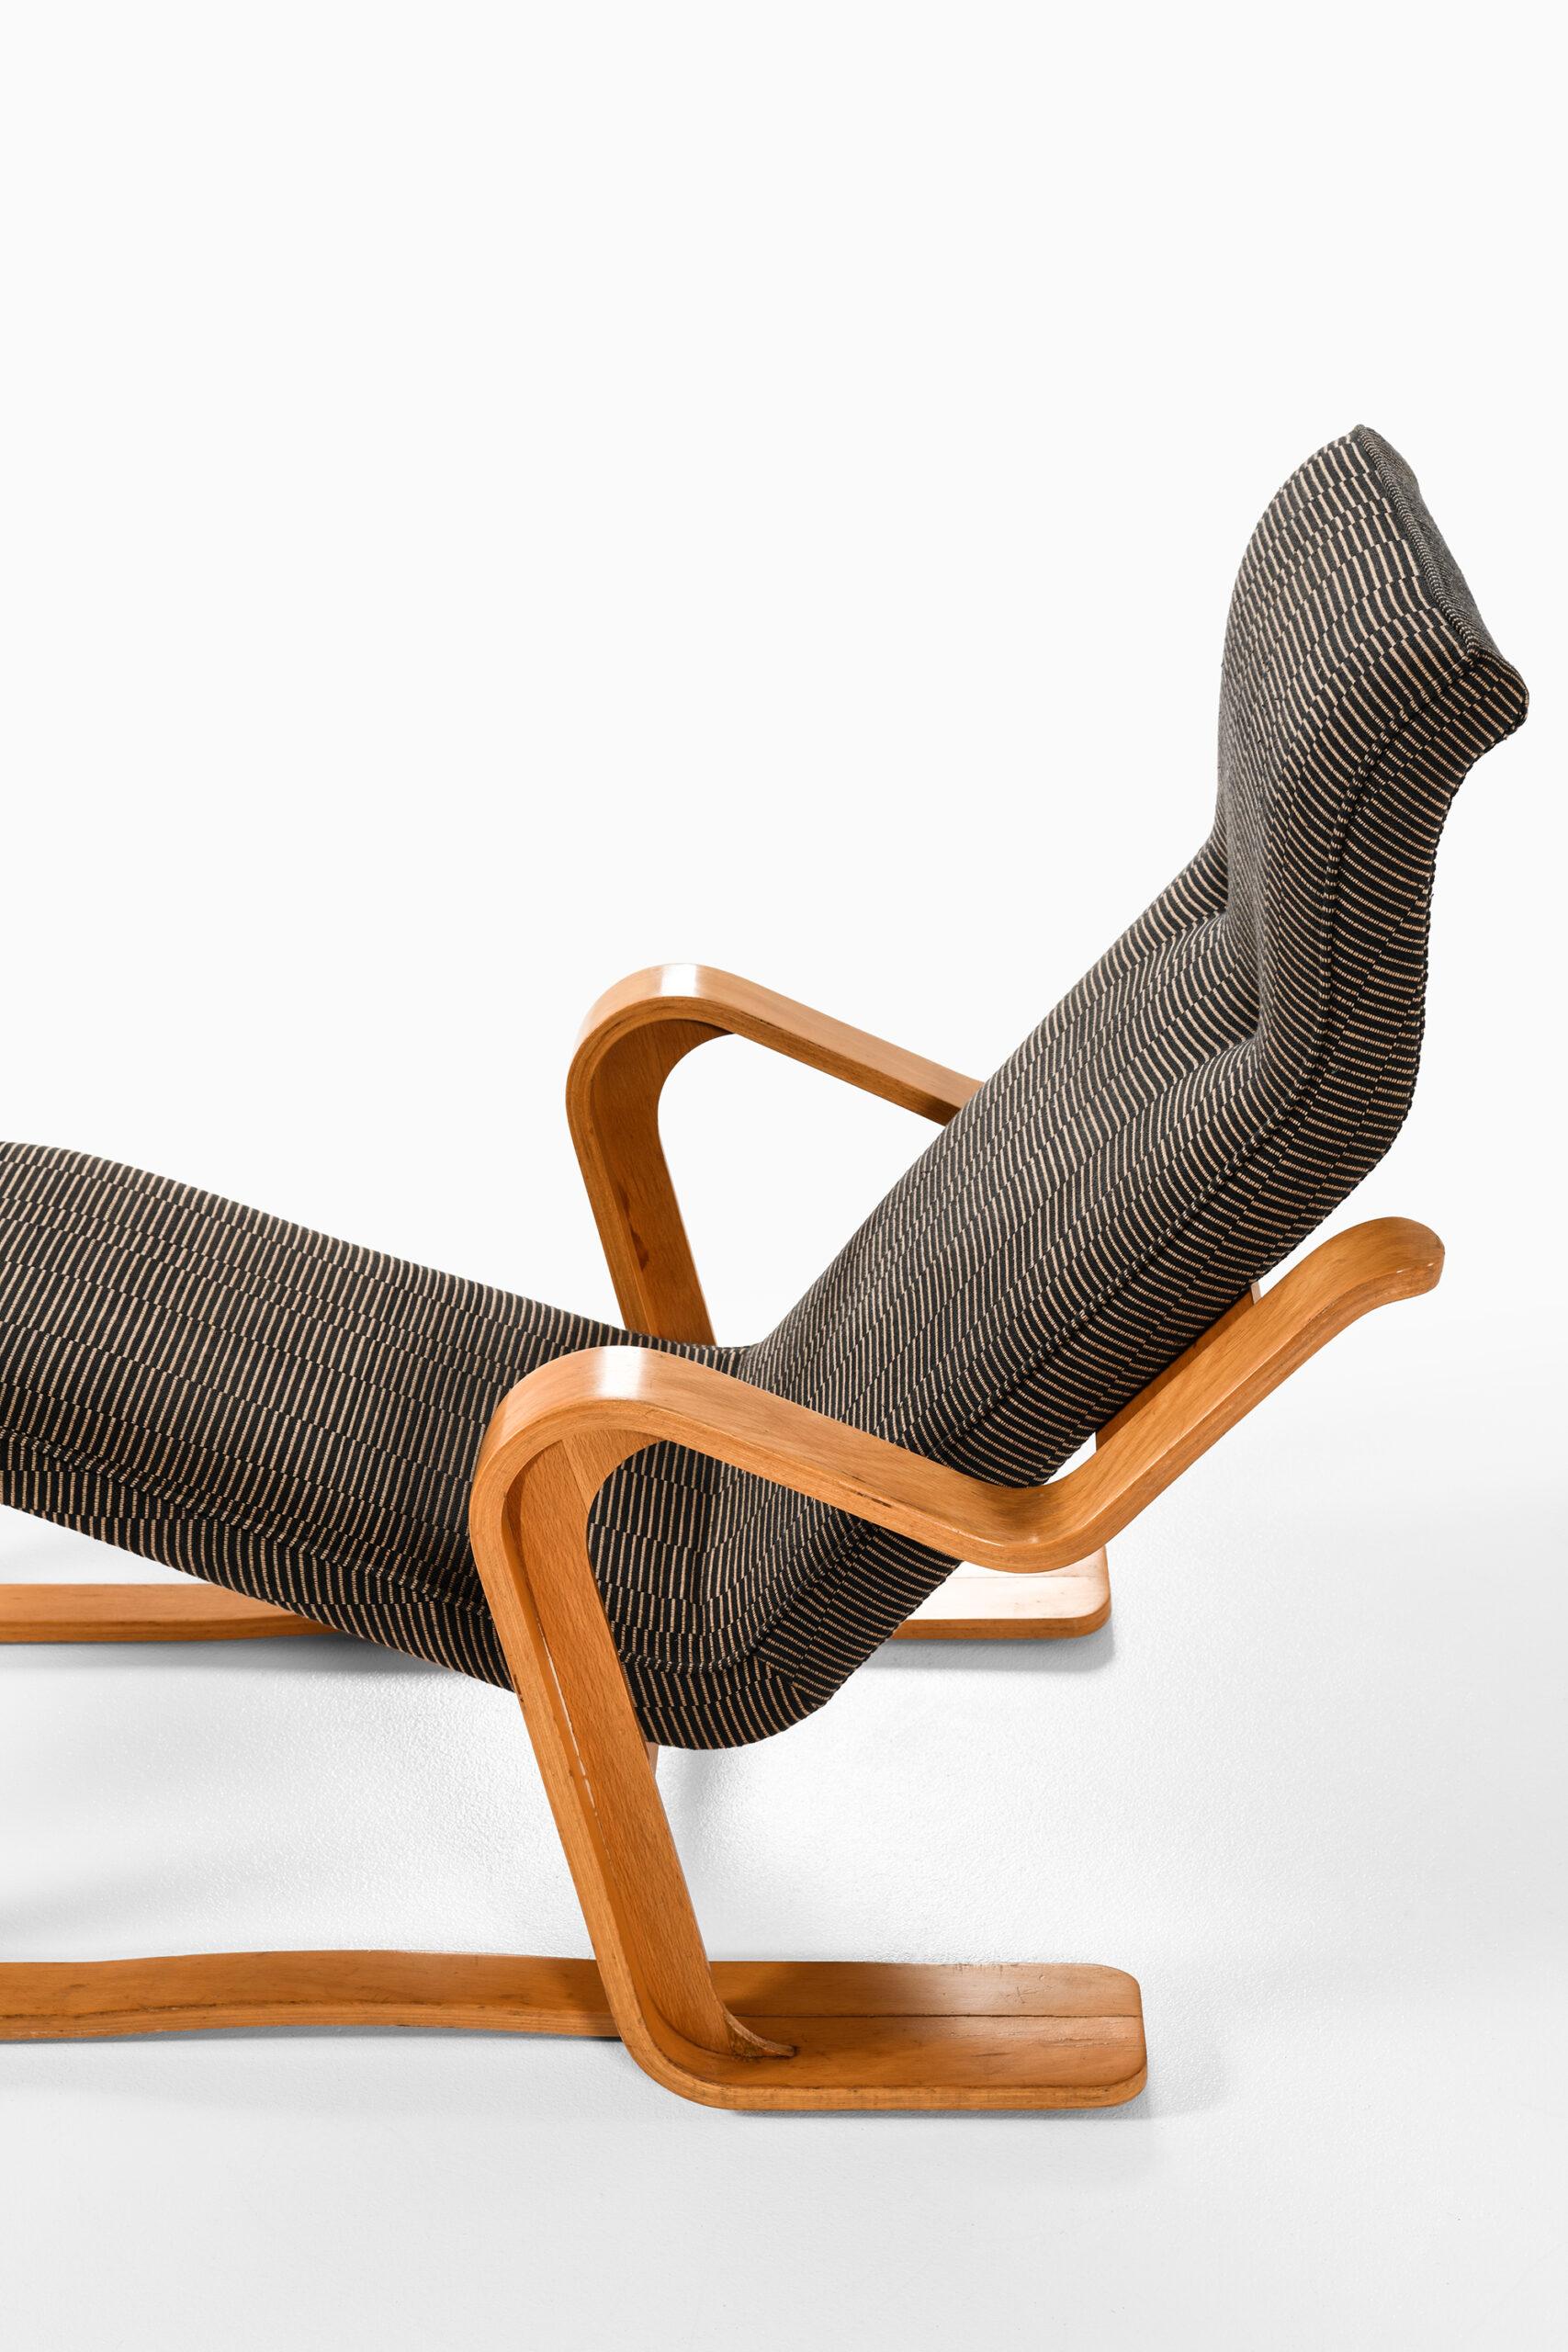 Rare lounge chair designed by Marcel Breuer. Produced by Isokon in England.